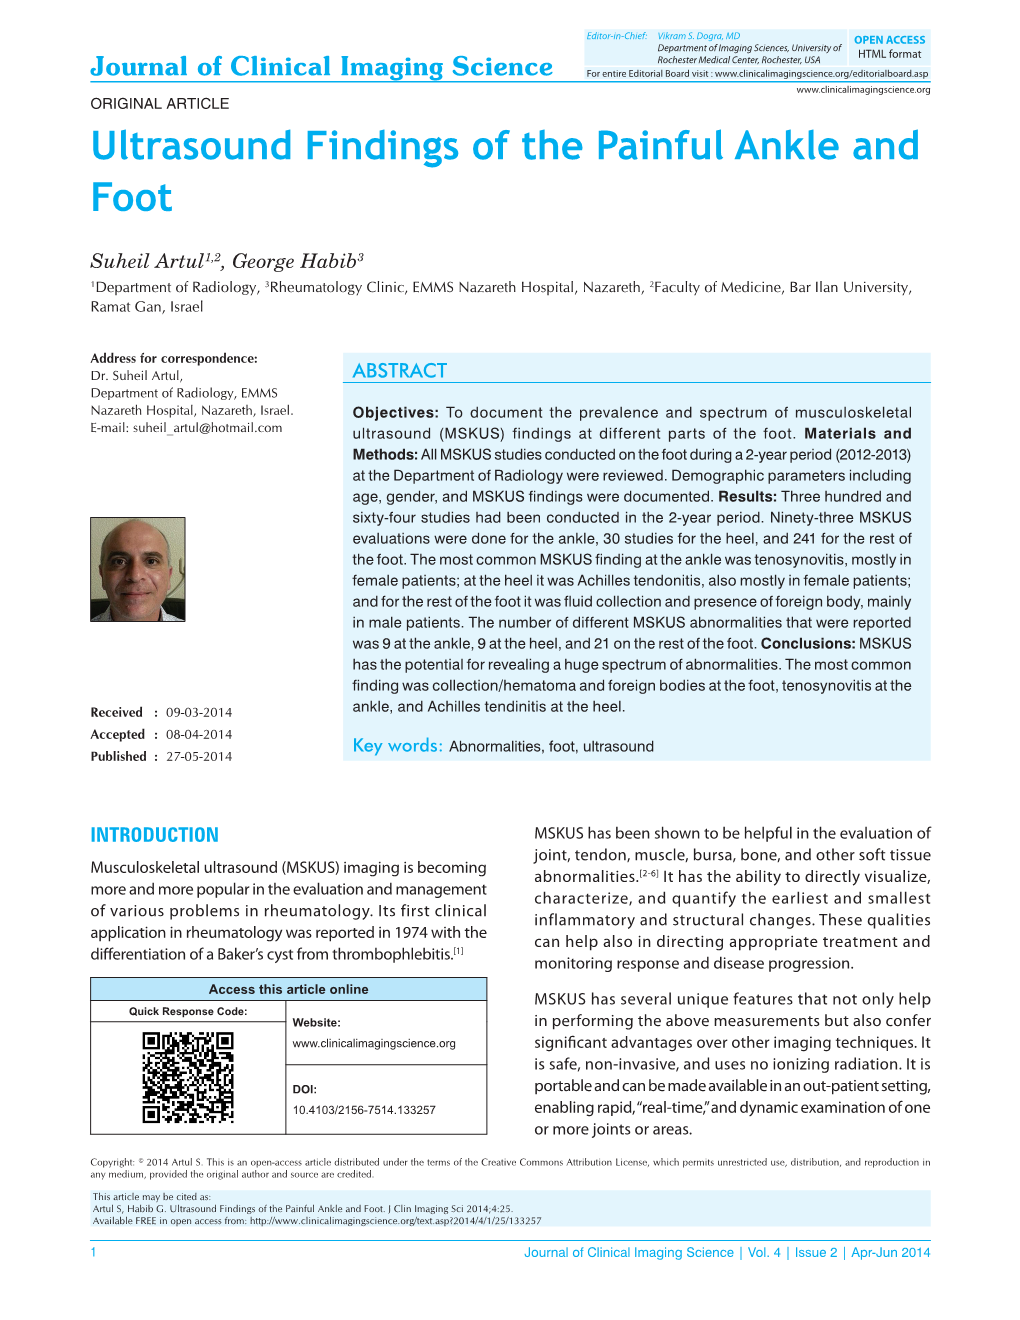 Ultrasound Findings of the Painful Ankle and Foot